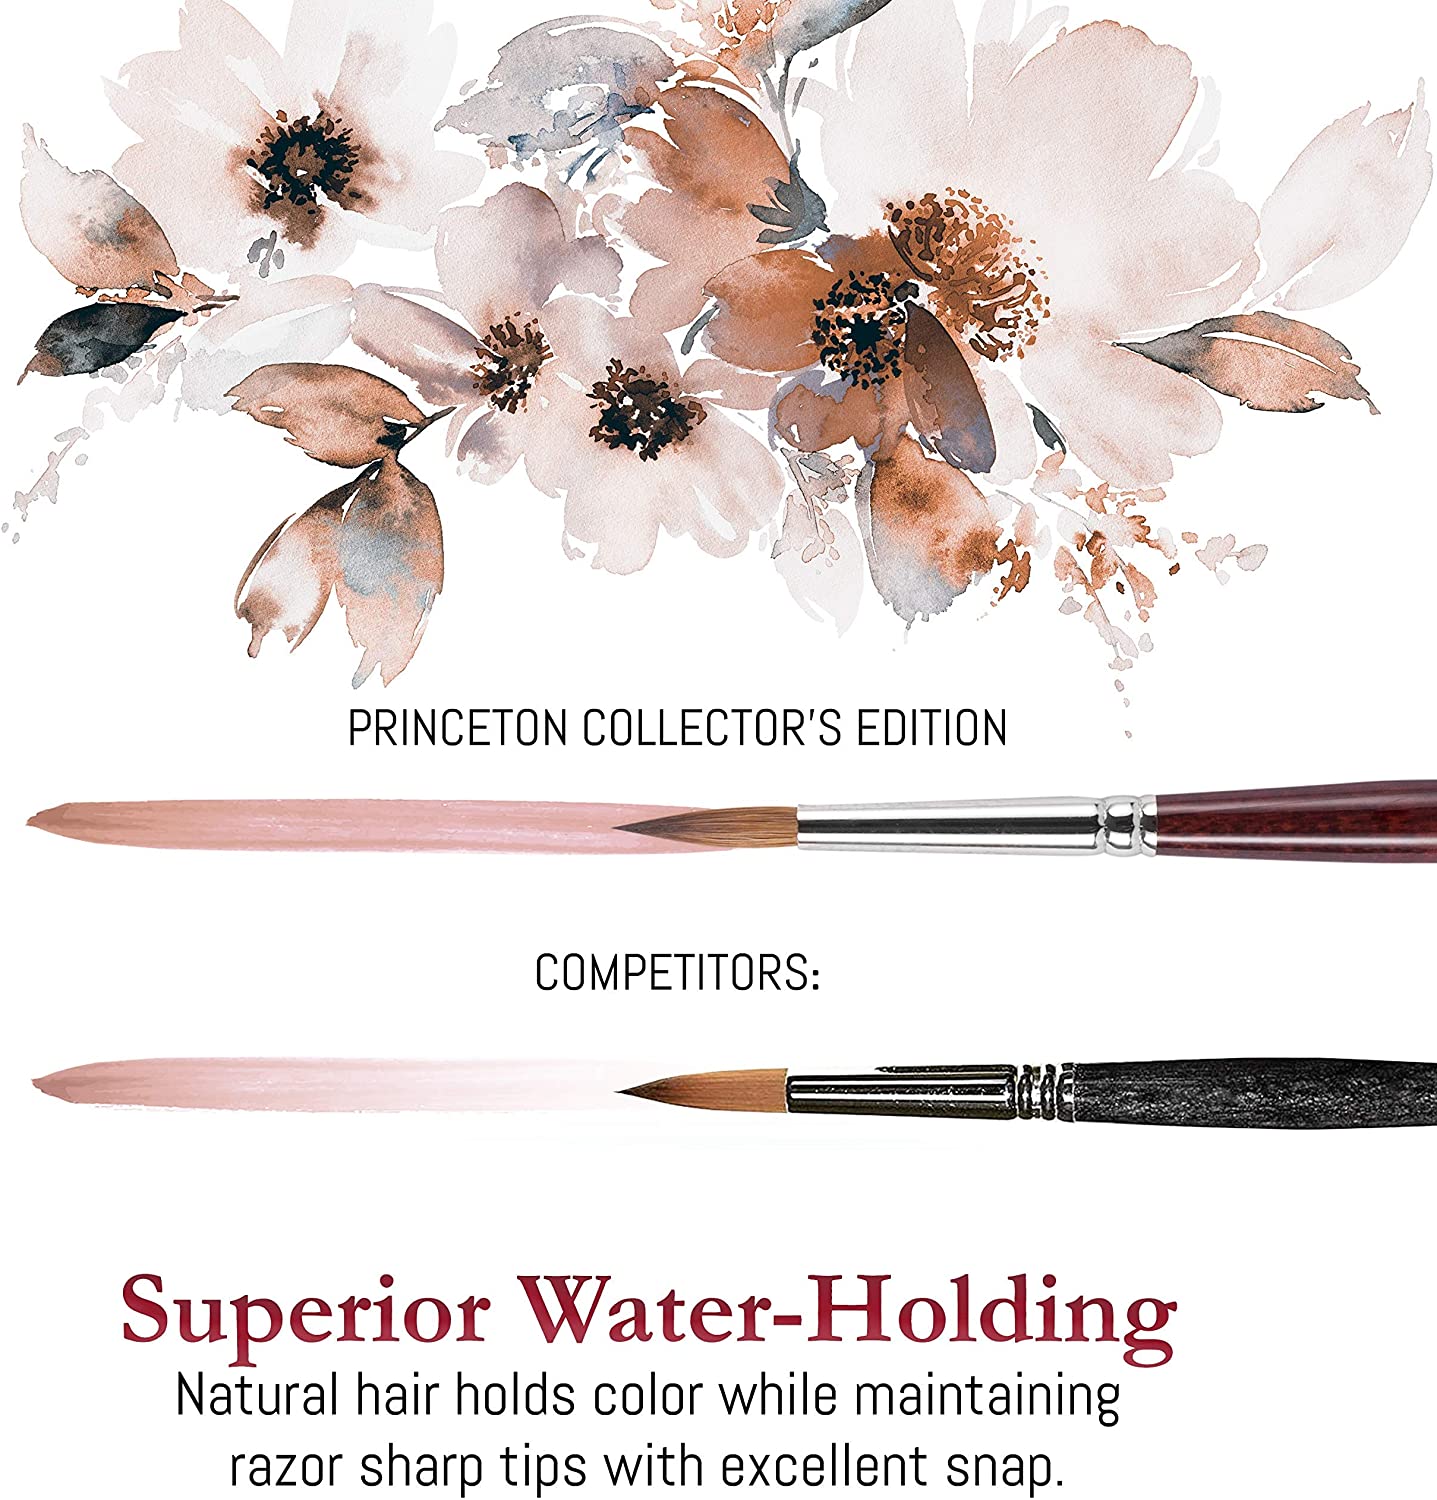 Princeton Artist Brush Co. Collector's Edition Kolinsky Sable Brushes features